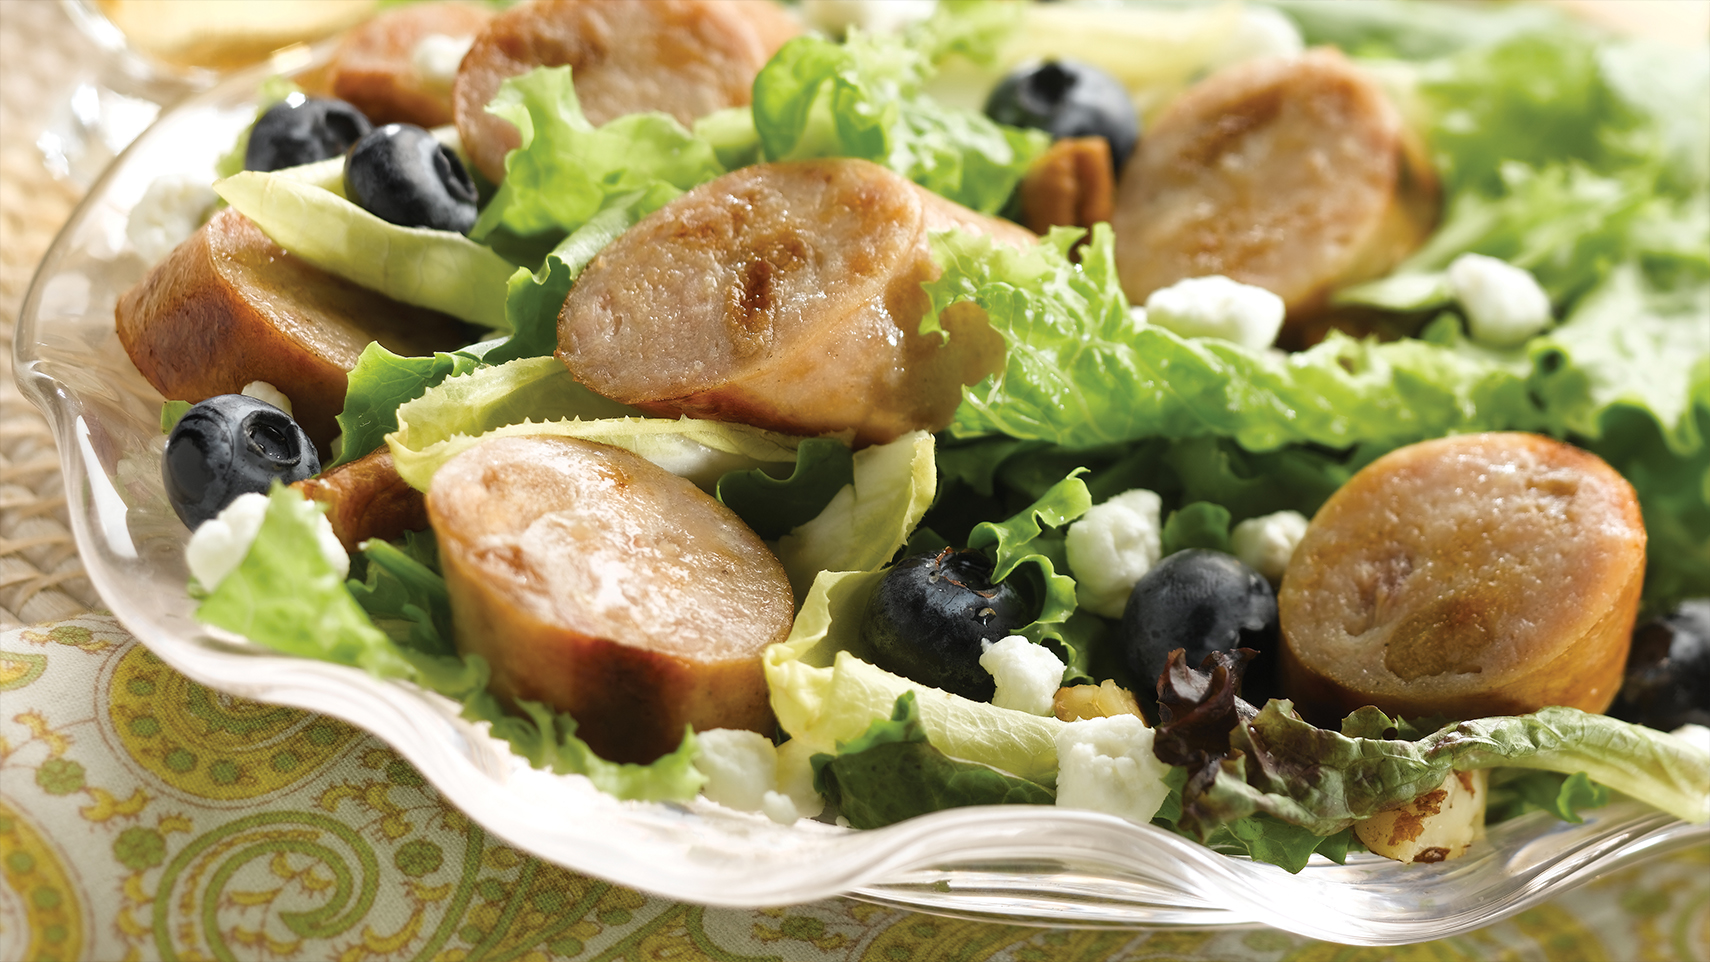 Sweet Apple Chicken Sausage, Endive, & Blueberry Salad with Toasted Pecans